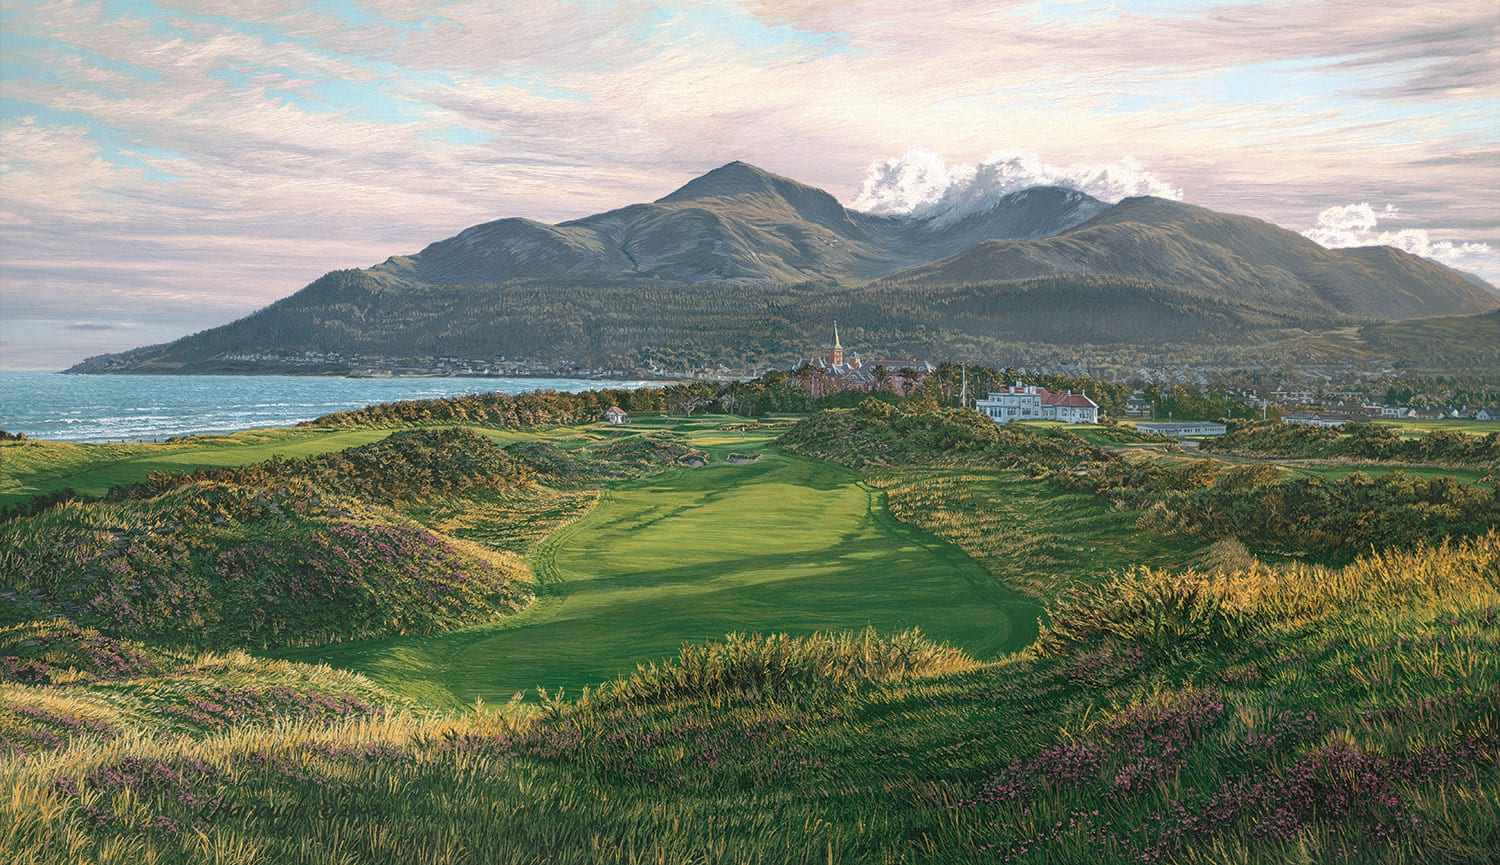 9th Hole Royal County Down, Newcastle, Northern Ireland.